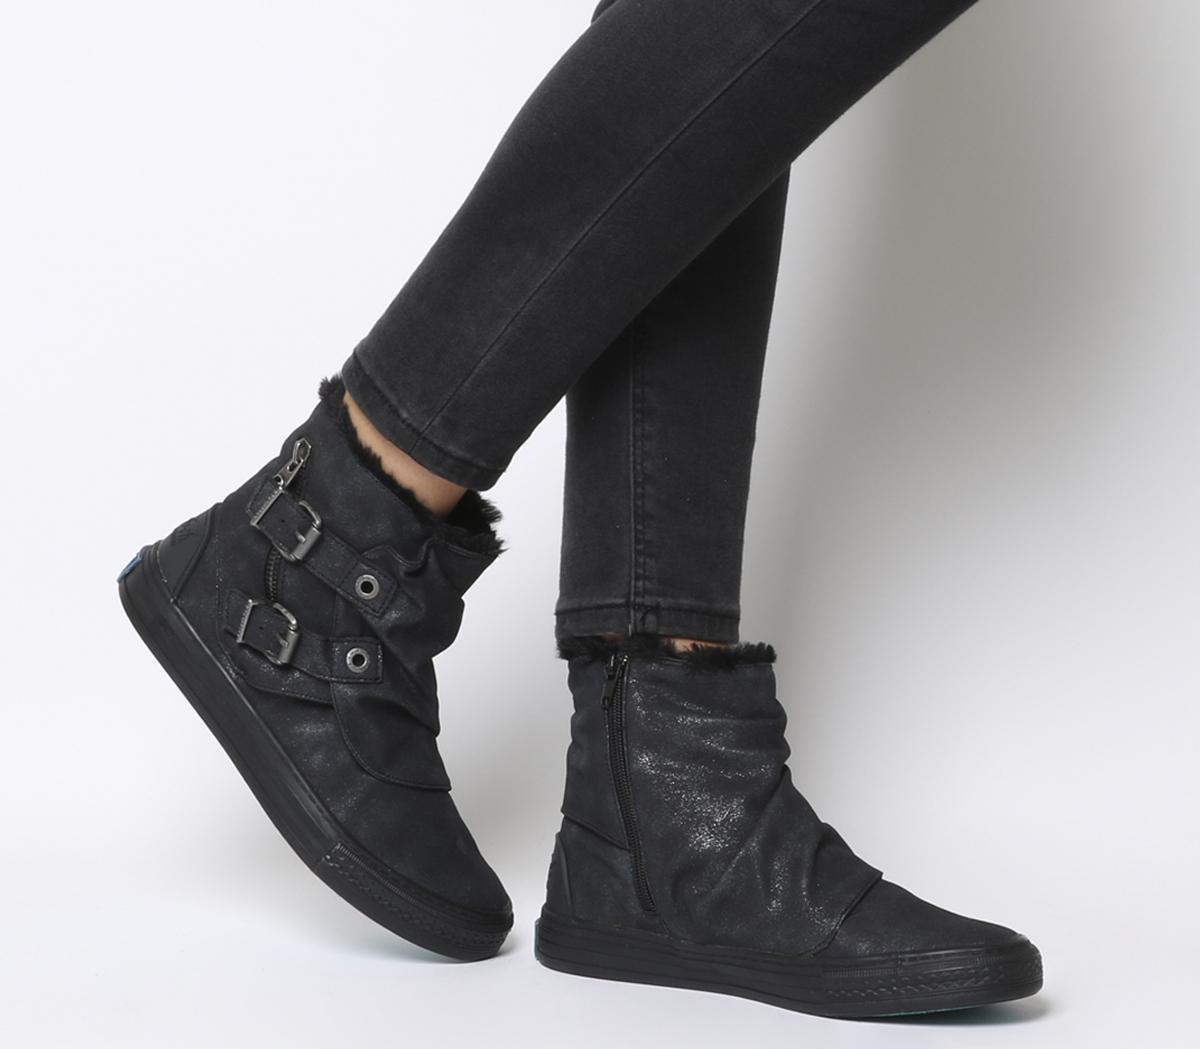 blowfish ankle boots uk